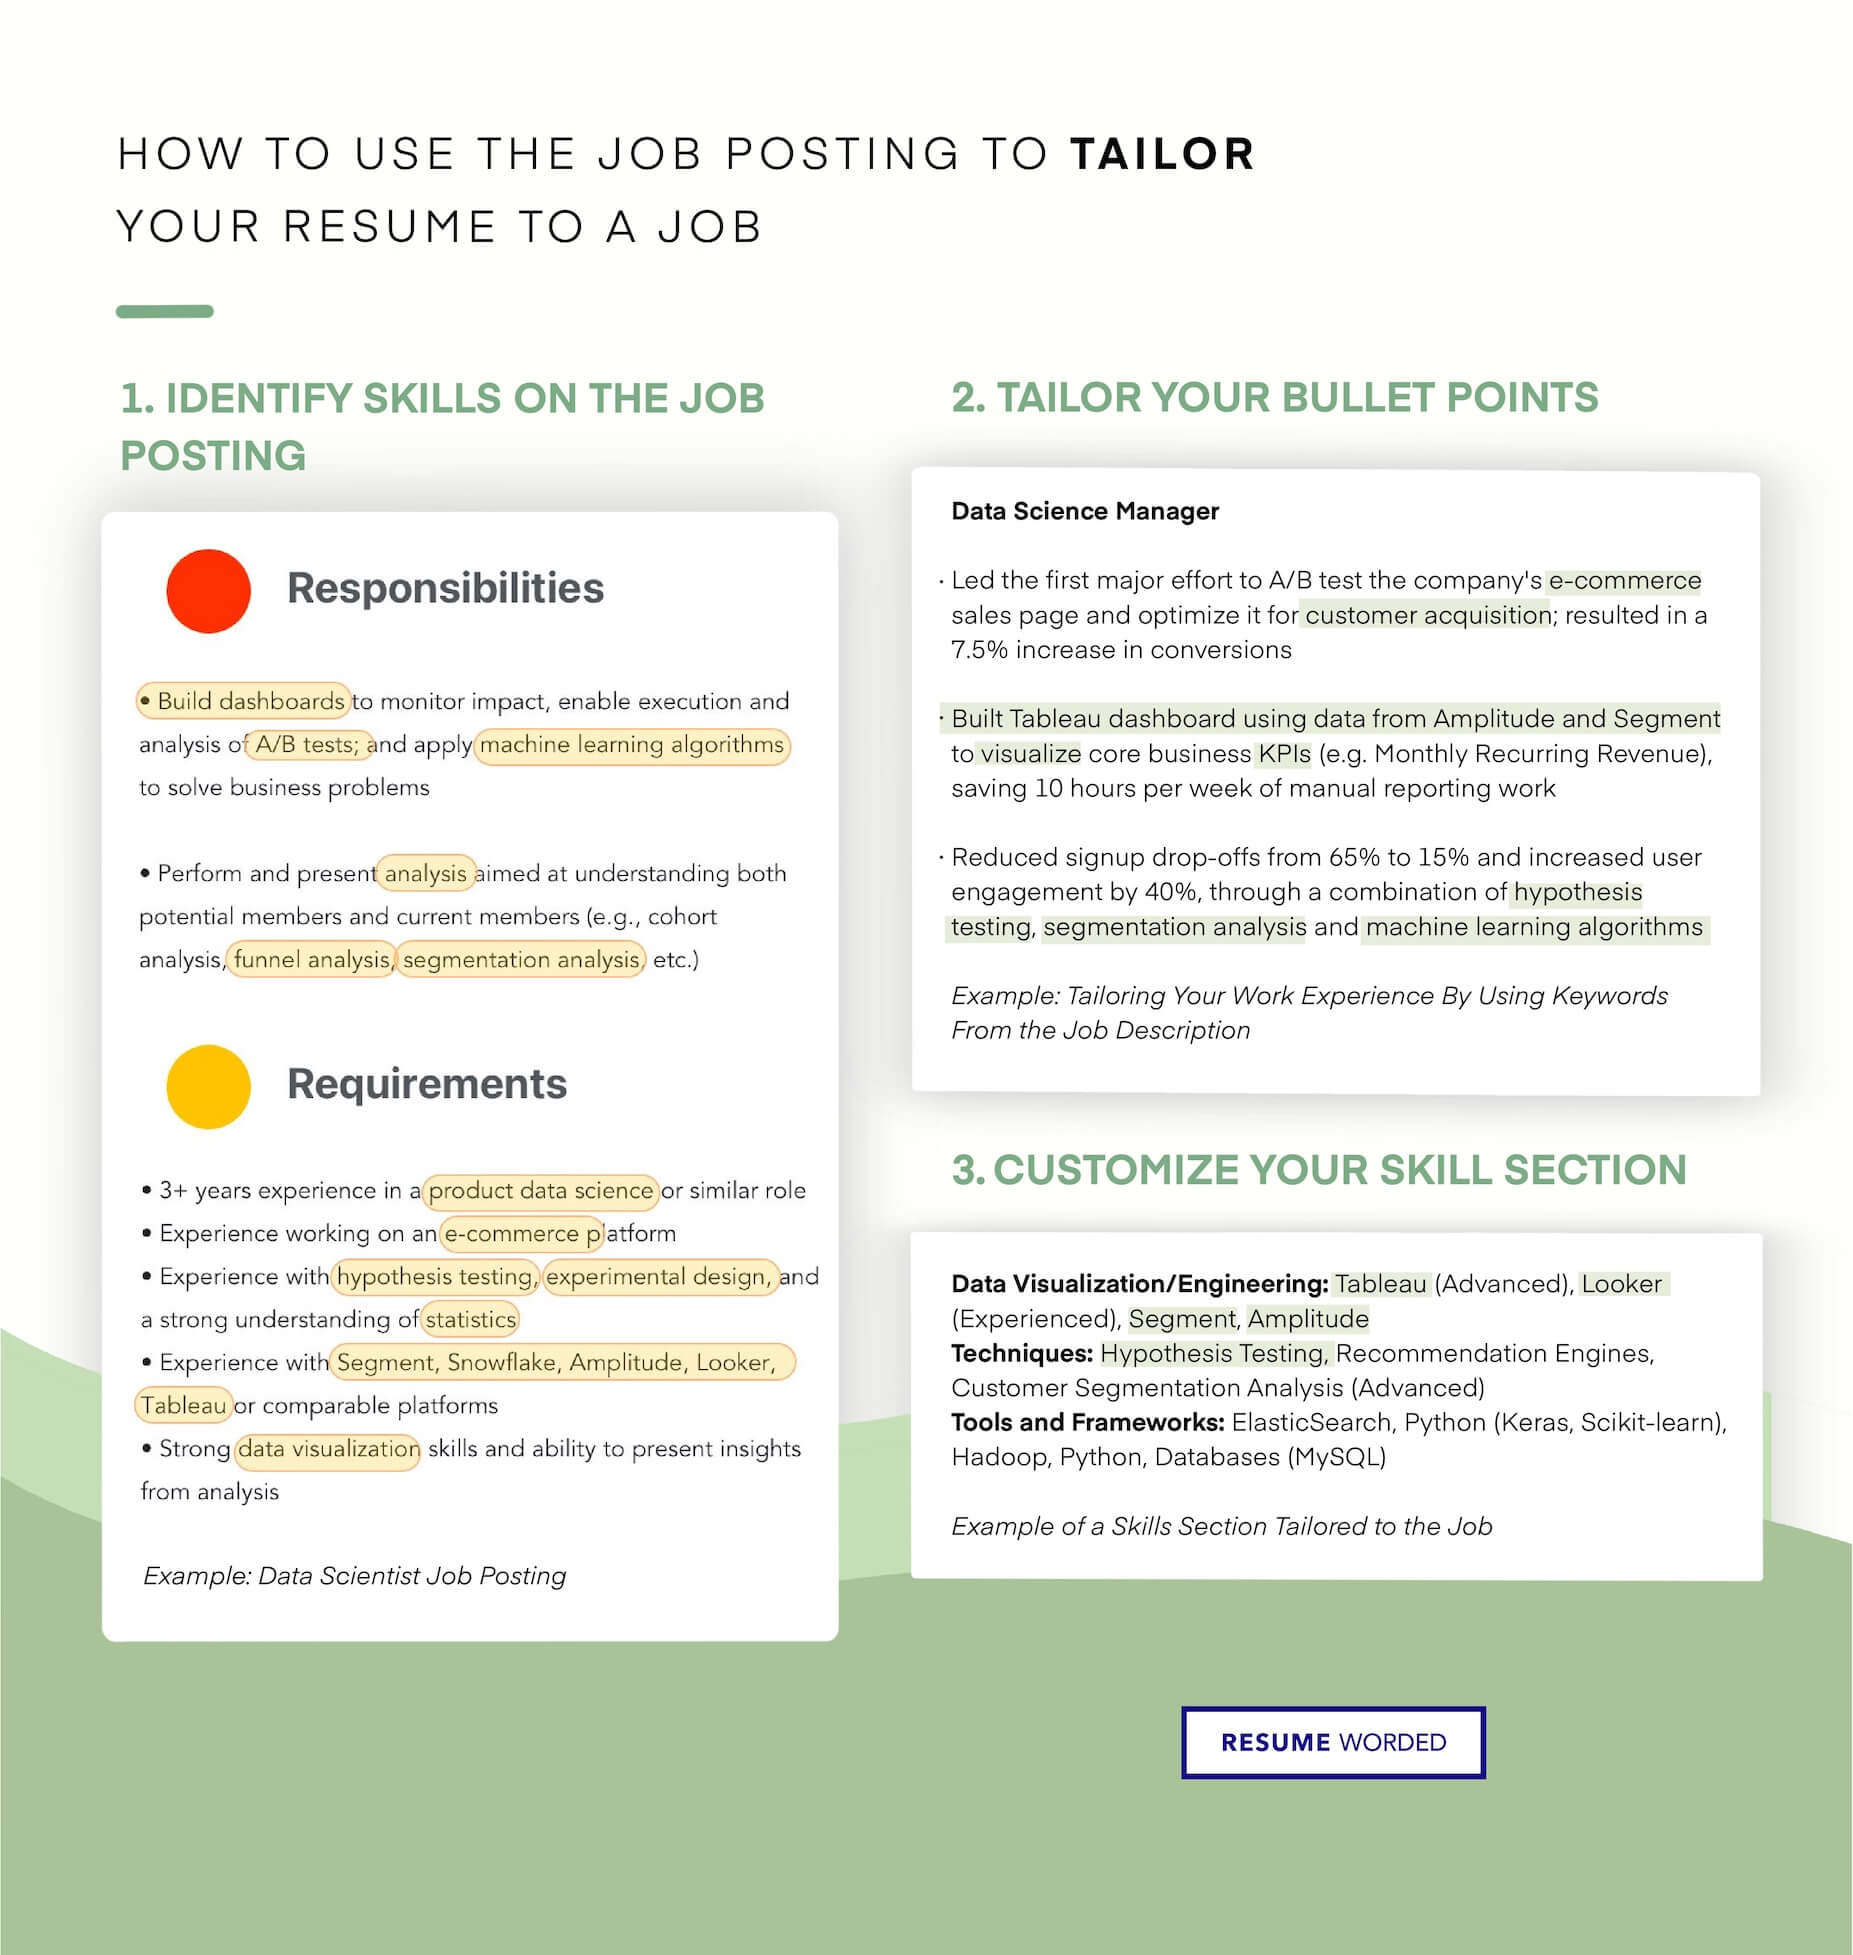 Know your audience and tailor your CV accordingly - Software Programmer  CV